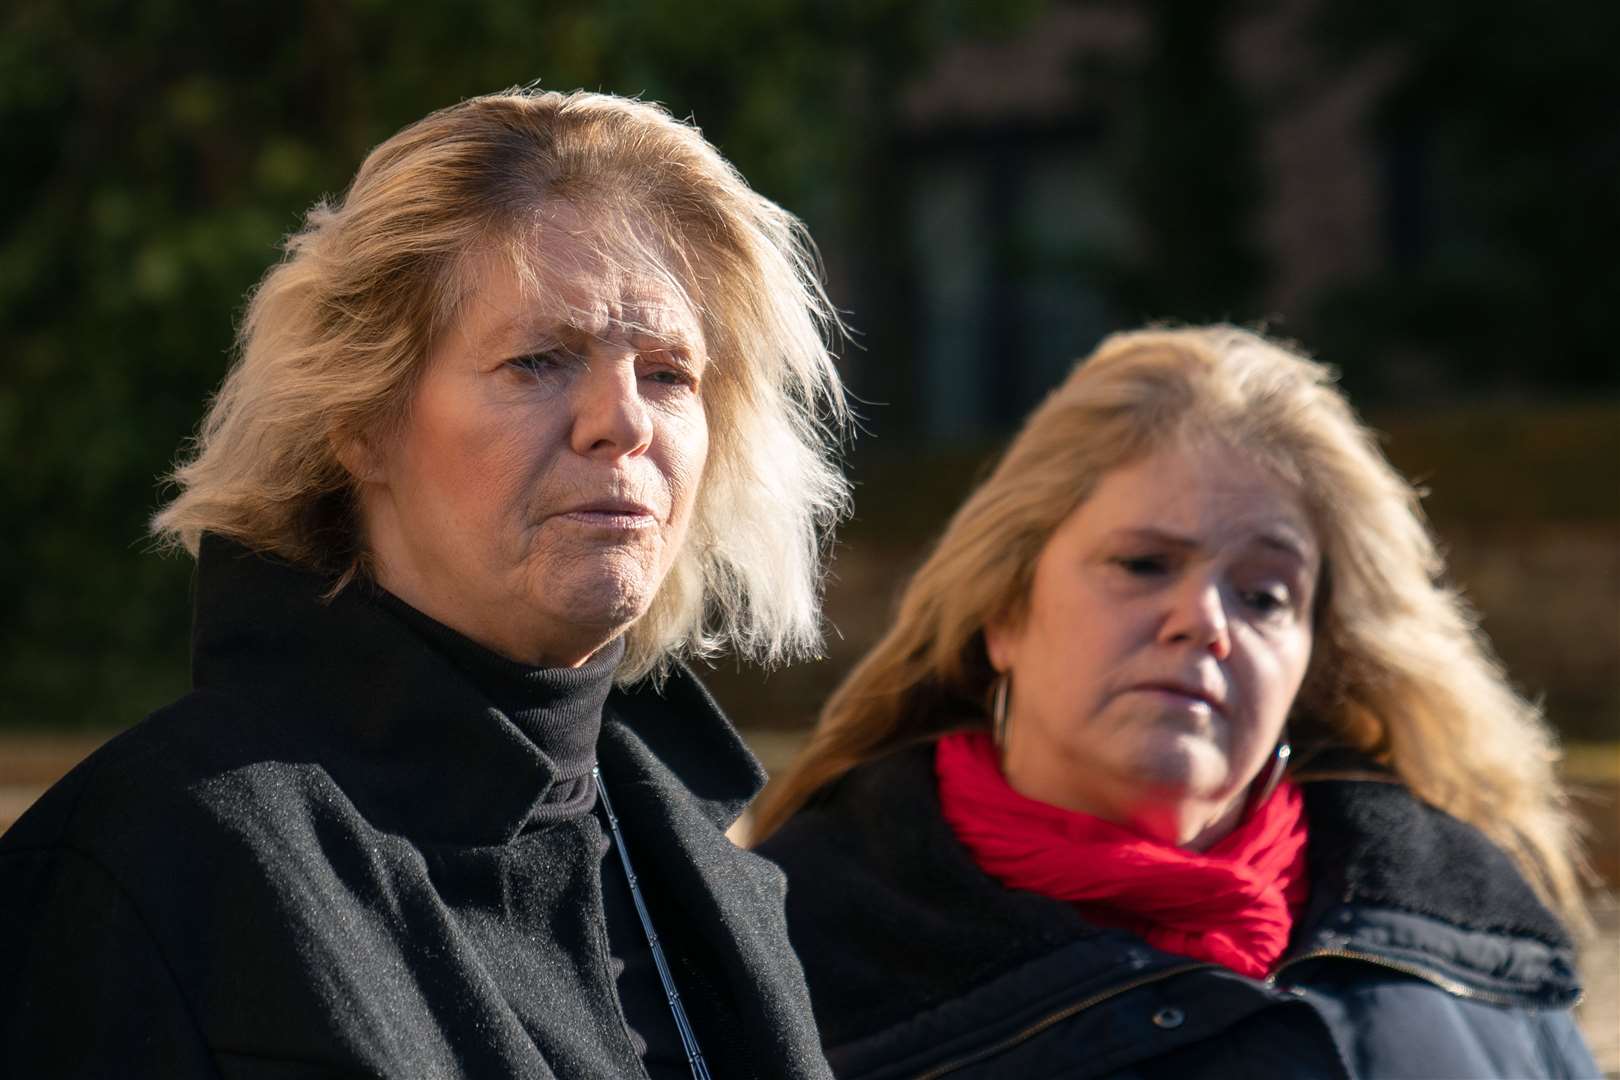 Kathy and Lisa, sisters of Jacqui Montgomery, said the decades McGrory spent out of prison were ‘soul-destroying’ for them (Joe Giddens/PA)